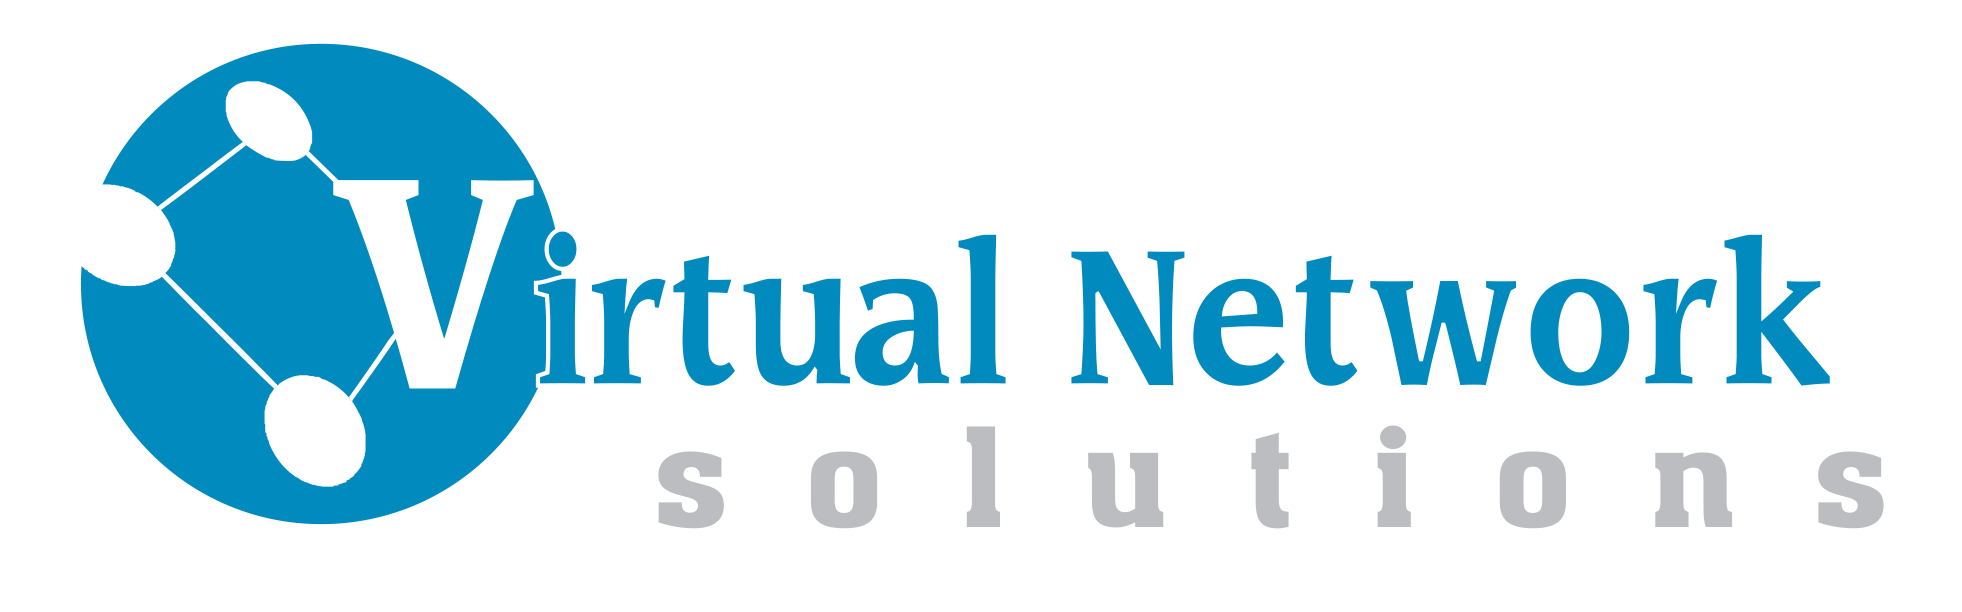 Virtual Network Solutions